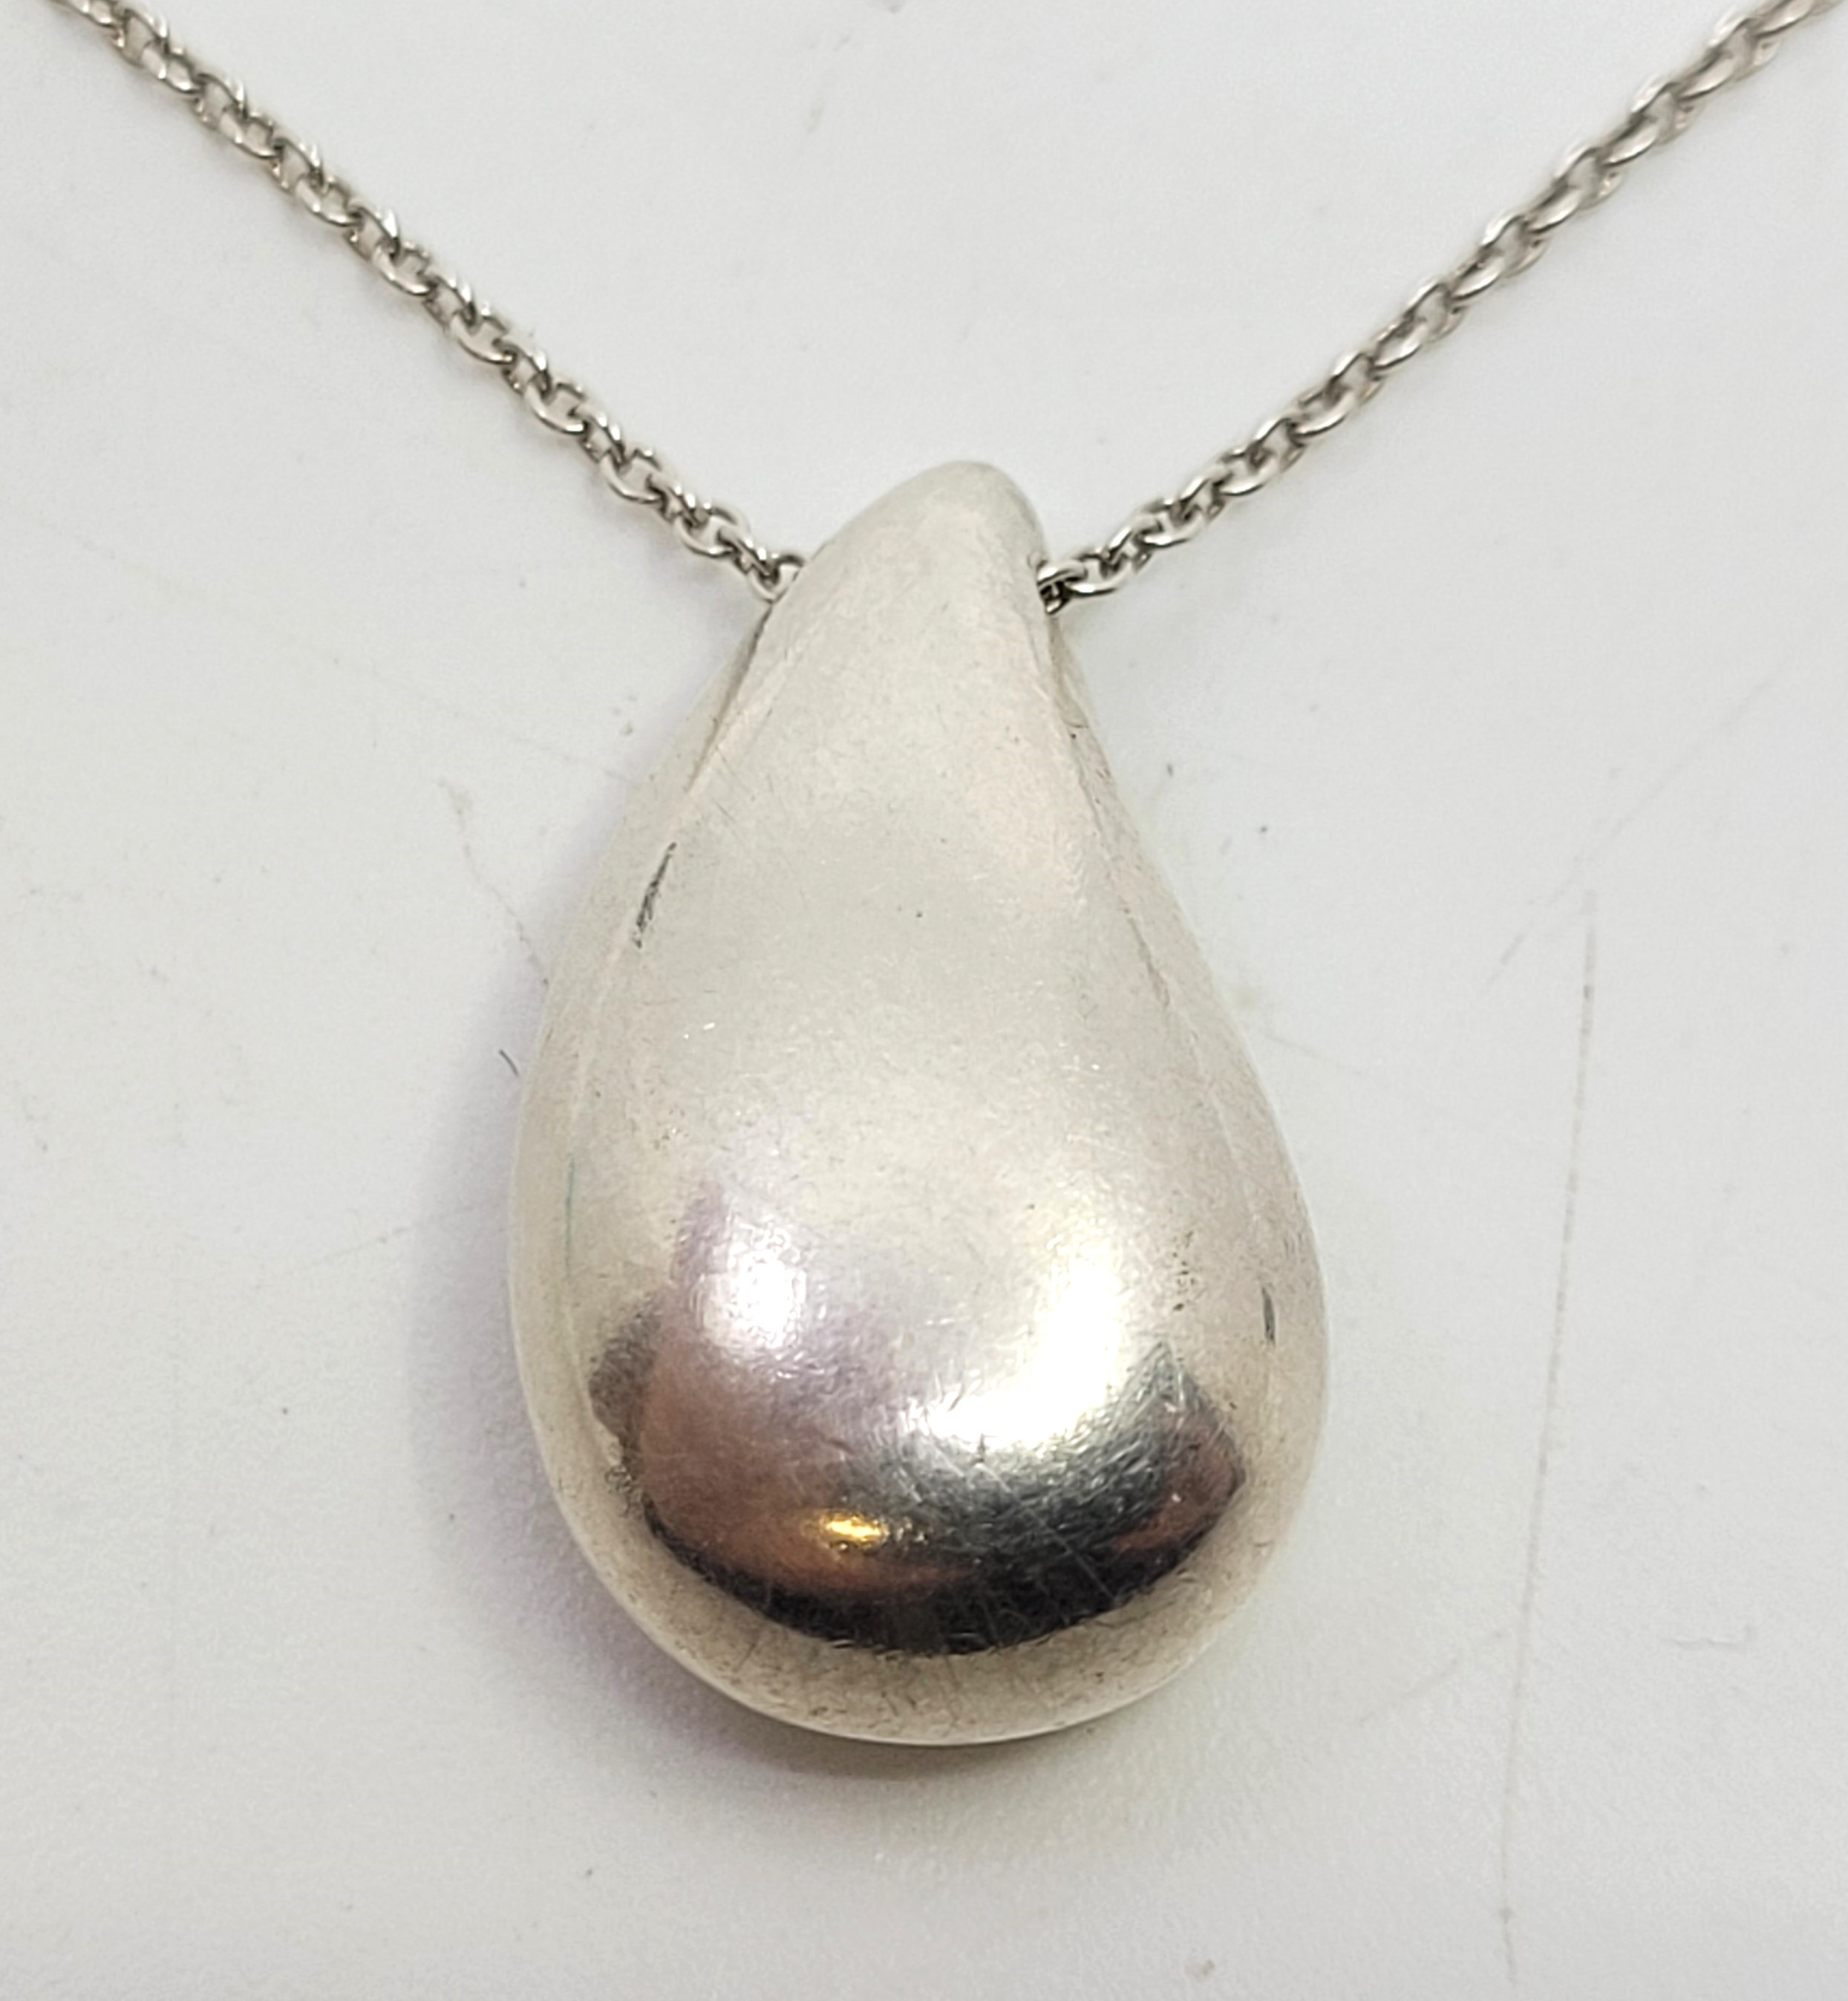 An Elsa Peretti for Tiffany & Co. sterling silver teardrop pendant necklace, height 21mm, to 46. - Image 10 of 12